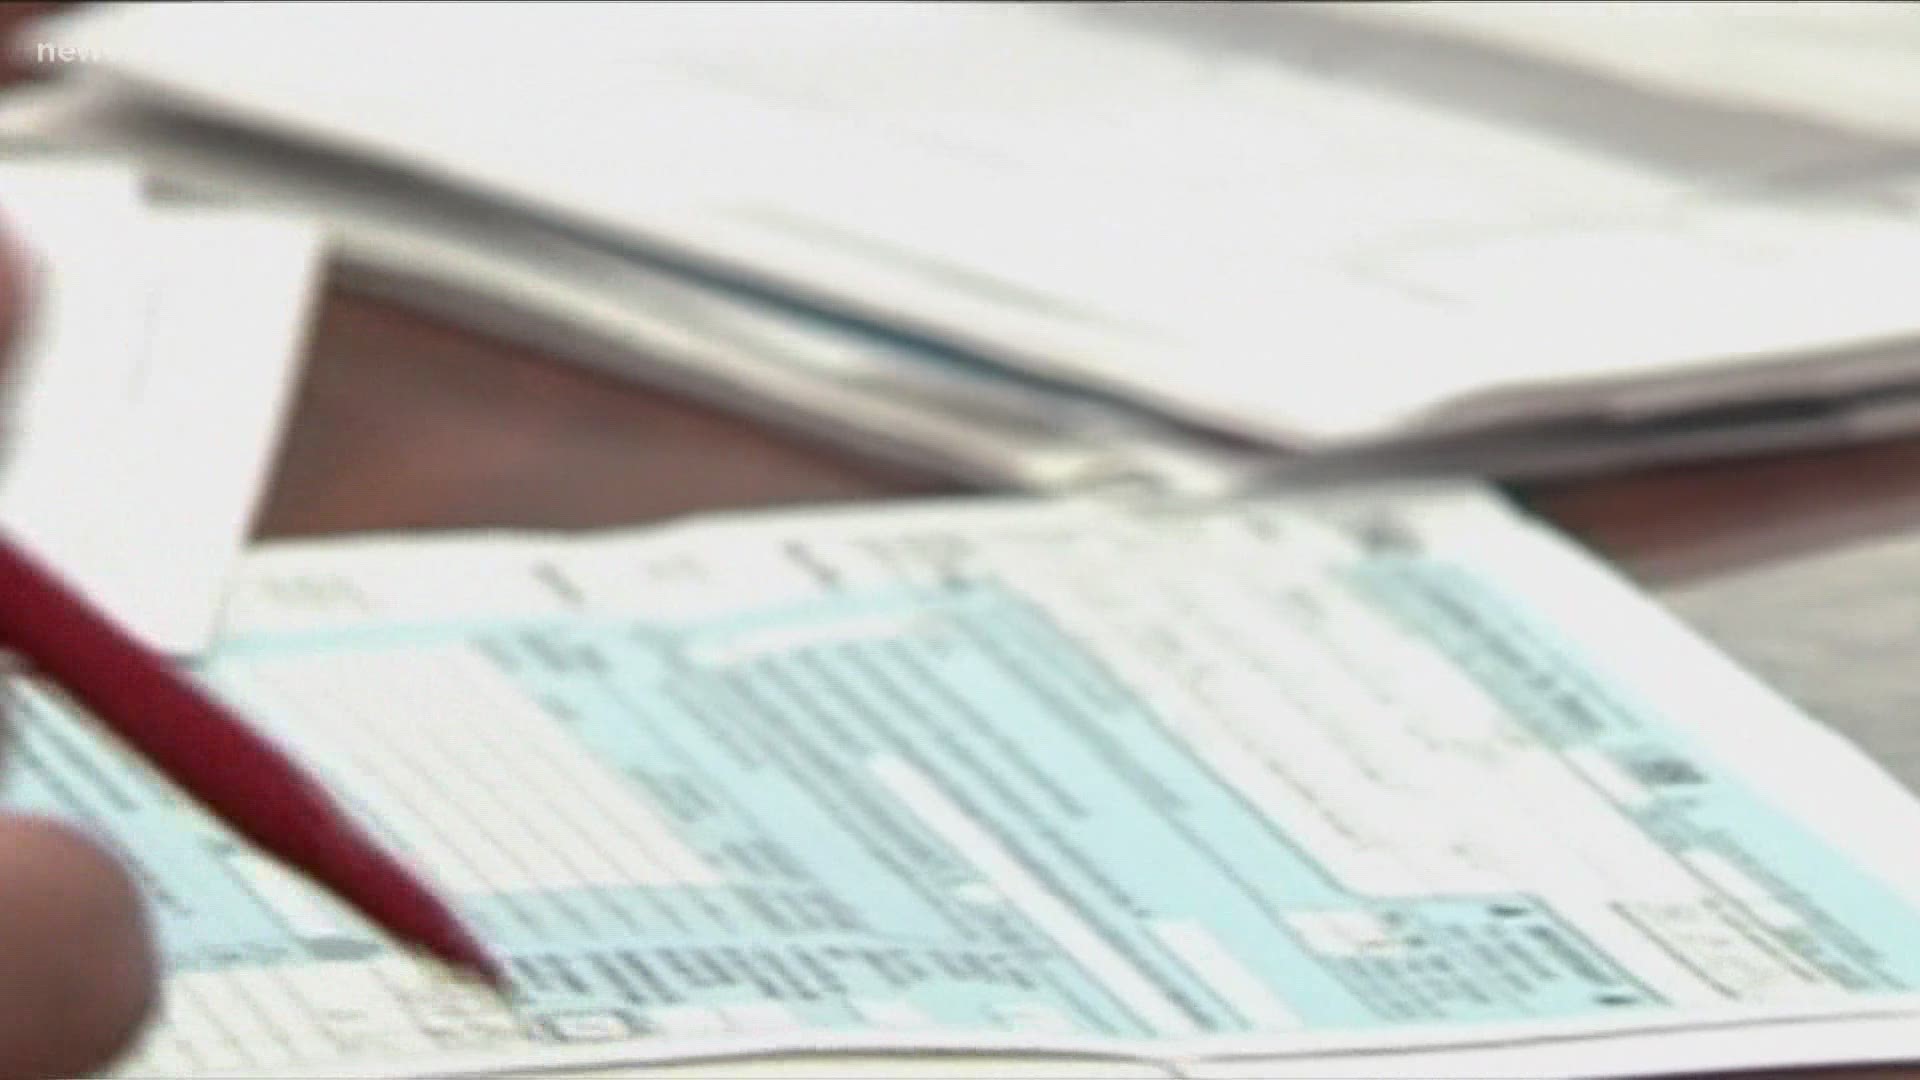 Texas, Louisiana and Oklahoma have gotten an extension to file taxes. The new deadline is June 15.